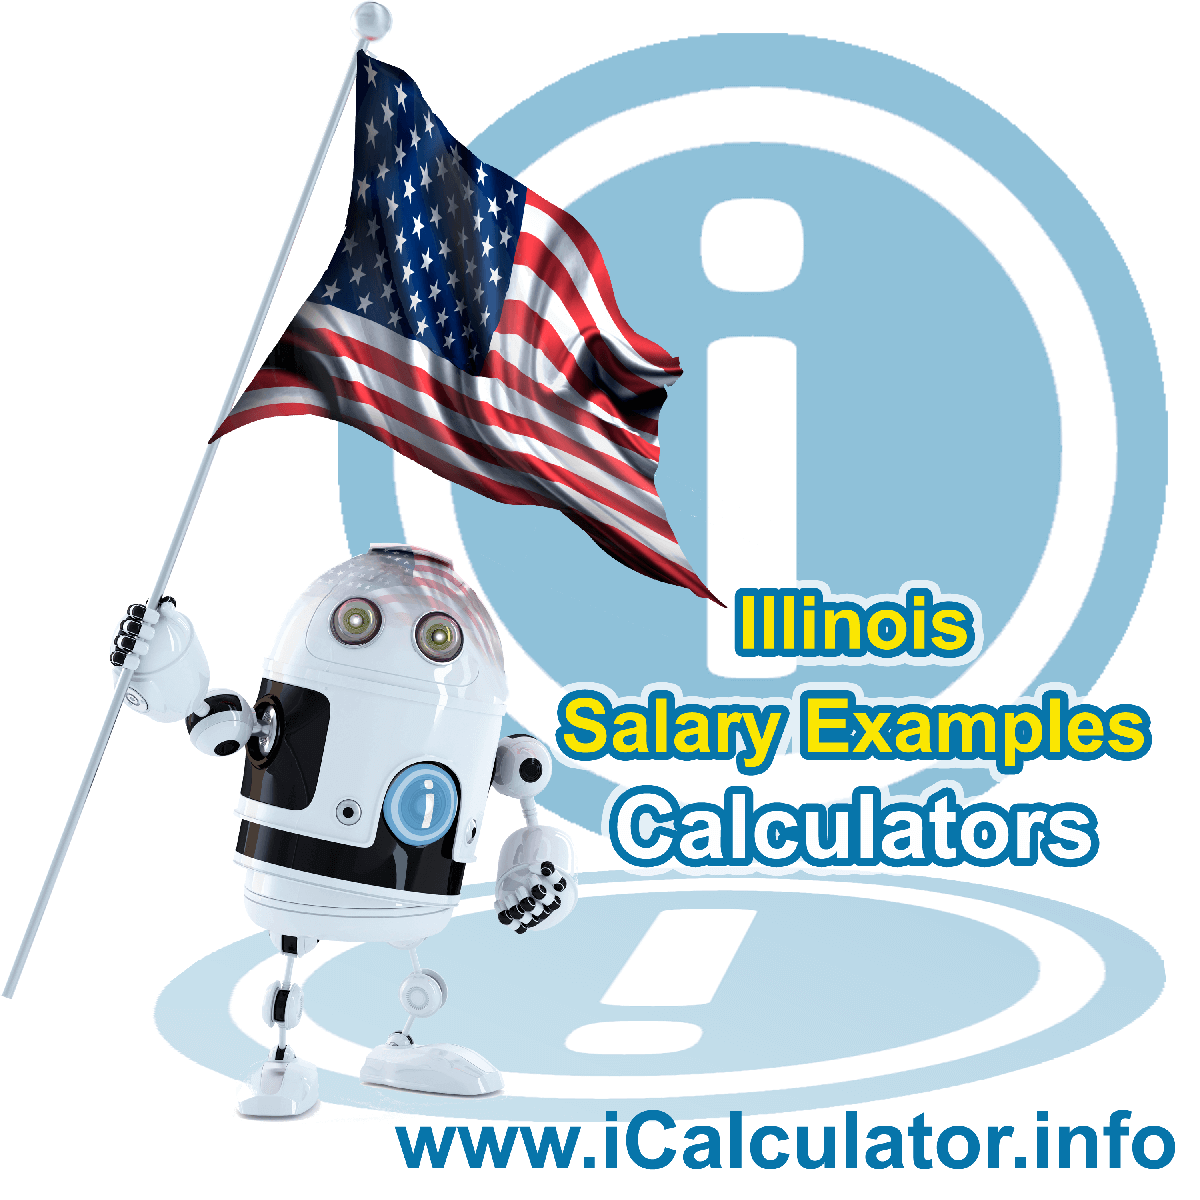 Illinois Salary Example for $ 210,000.00 in 2023 | iCalculator™ | $ 210,000.00 salary example for employee and employer paying Illinois State tincome taxes. Detailed salary after tax calculation including Illinois State Tax, Federal State Tax, Medicare Deductions, Social Security, Capital Gains and other income tax and salary deductions complete with supporting Illinois state tax tables 